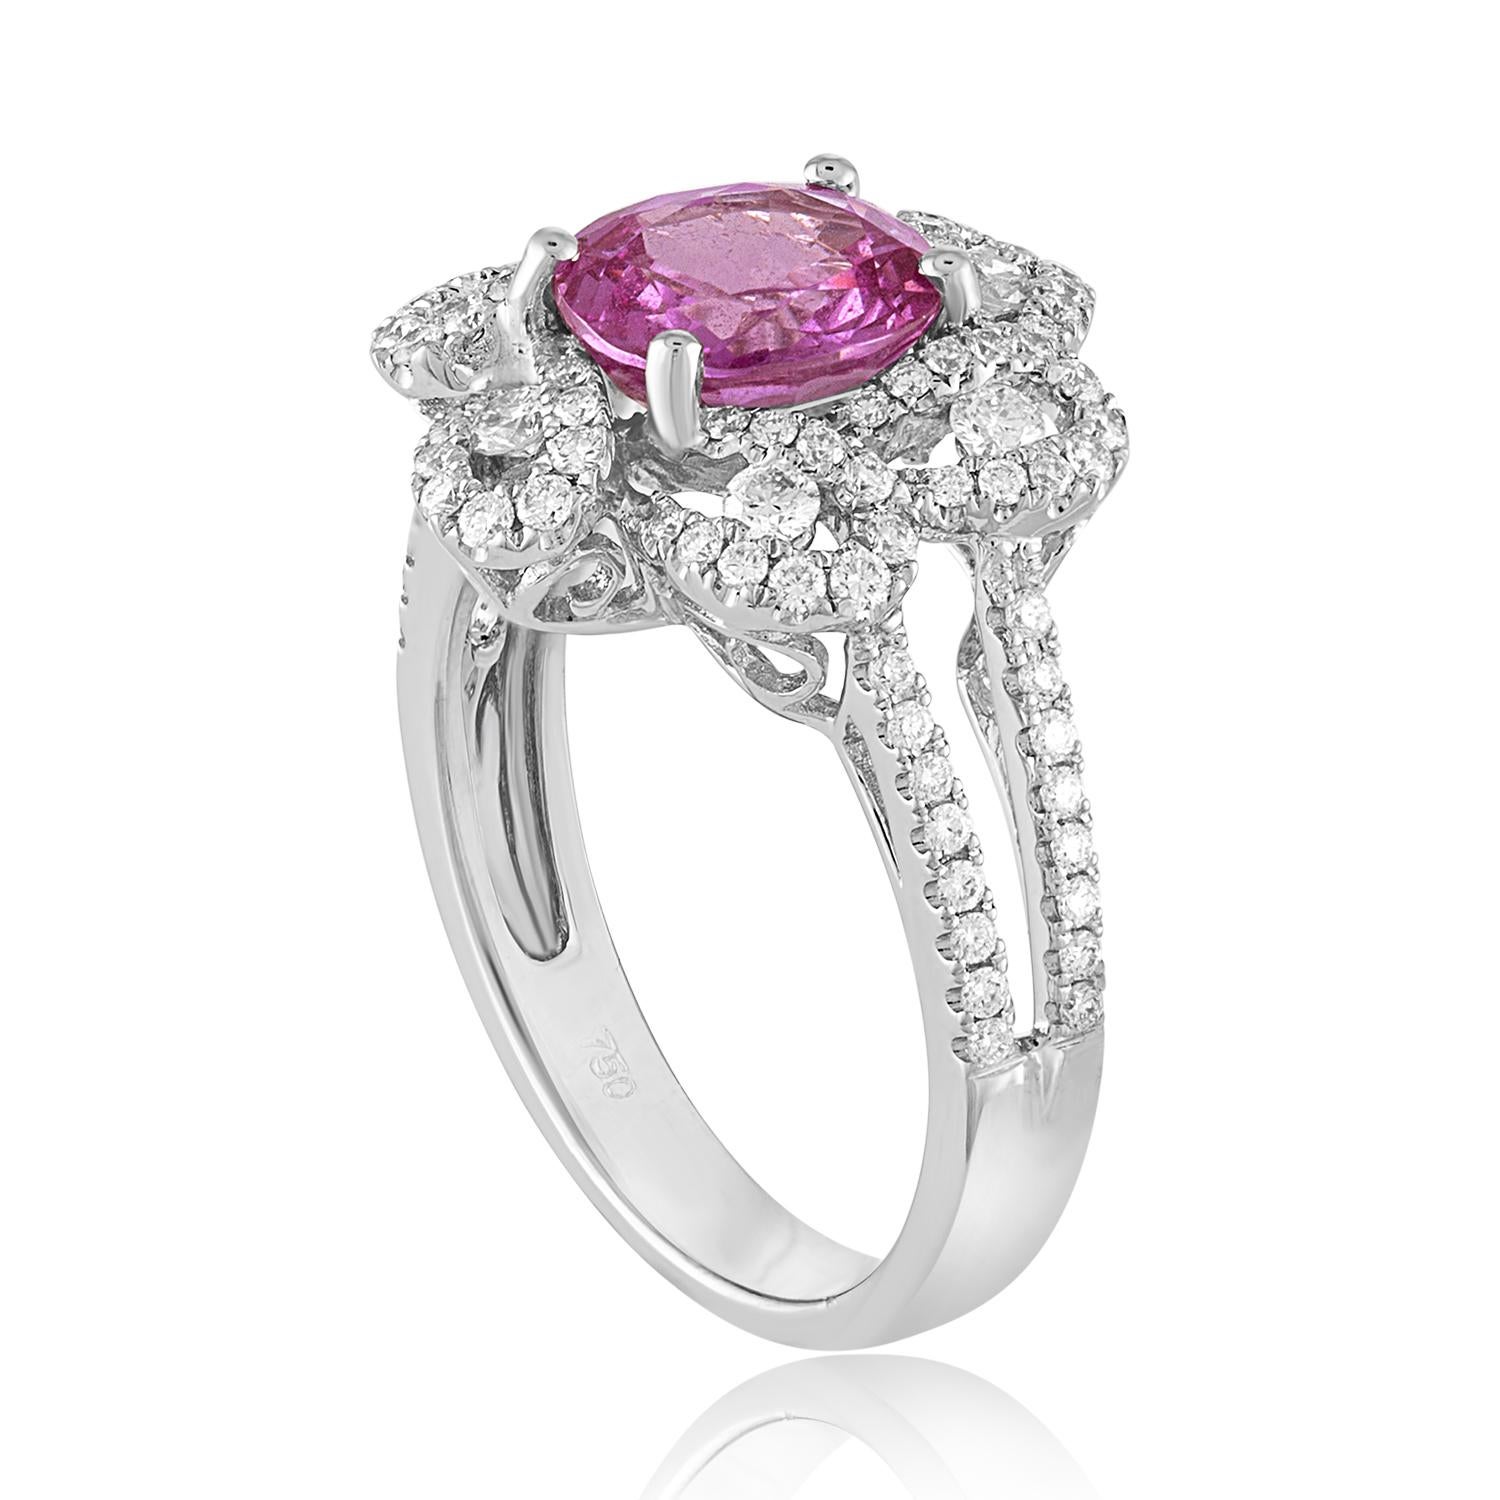 Beautiful Flower Ring
The ring is 18K White Gold
The Center Stone is a Pink Cushion Sapphire 1.90 Carat HEATED
The Sapphire is AGL Certified
There are 0.59 Carats in Diamonds F VS
The top of the ring measures 15.72mm wide
The ring is a size 5.75,